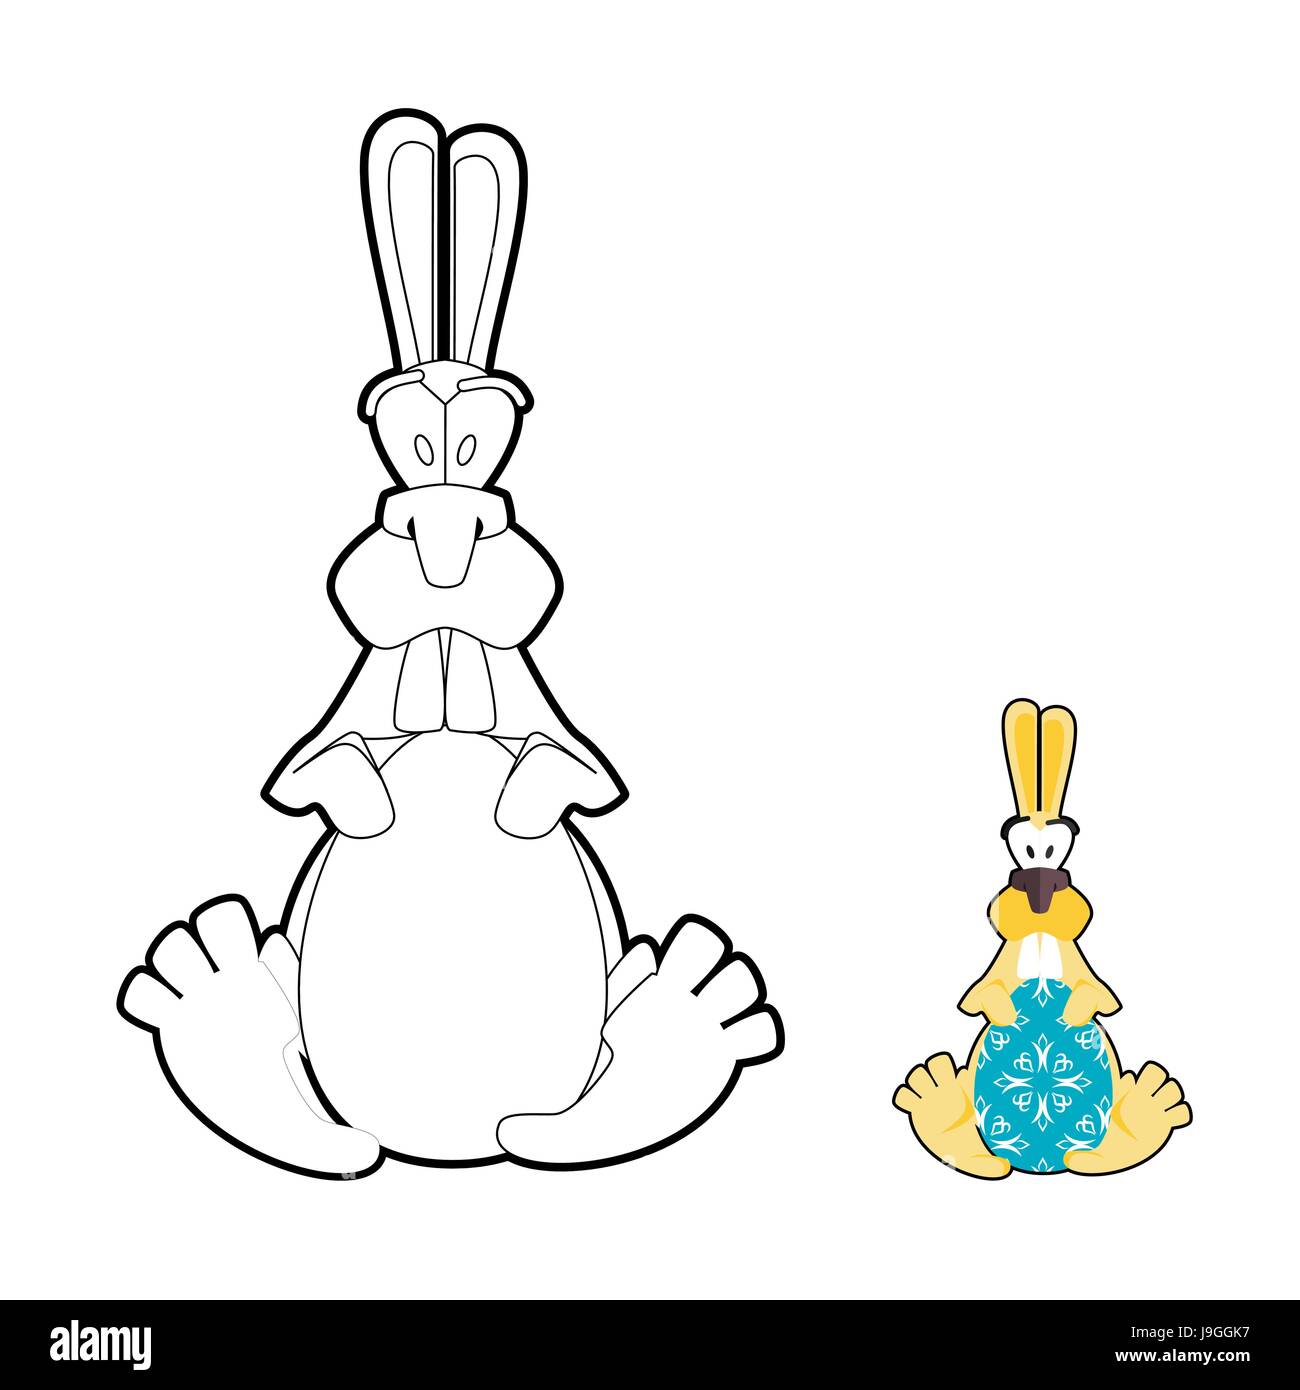 Rabbit and Easter egg coloring book. Traditional Easter Bunny and beautiful multicolored egg. Childrens coloring book for holidays Stock Vector